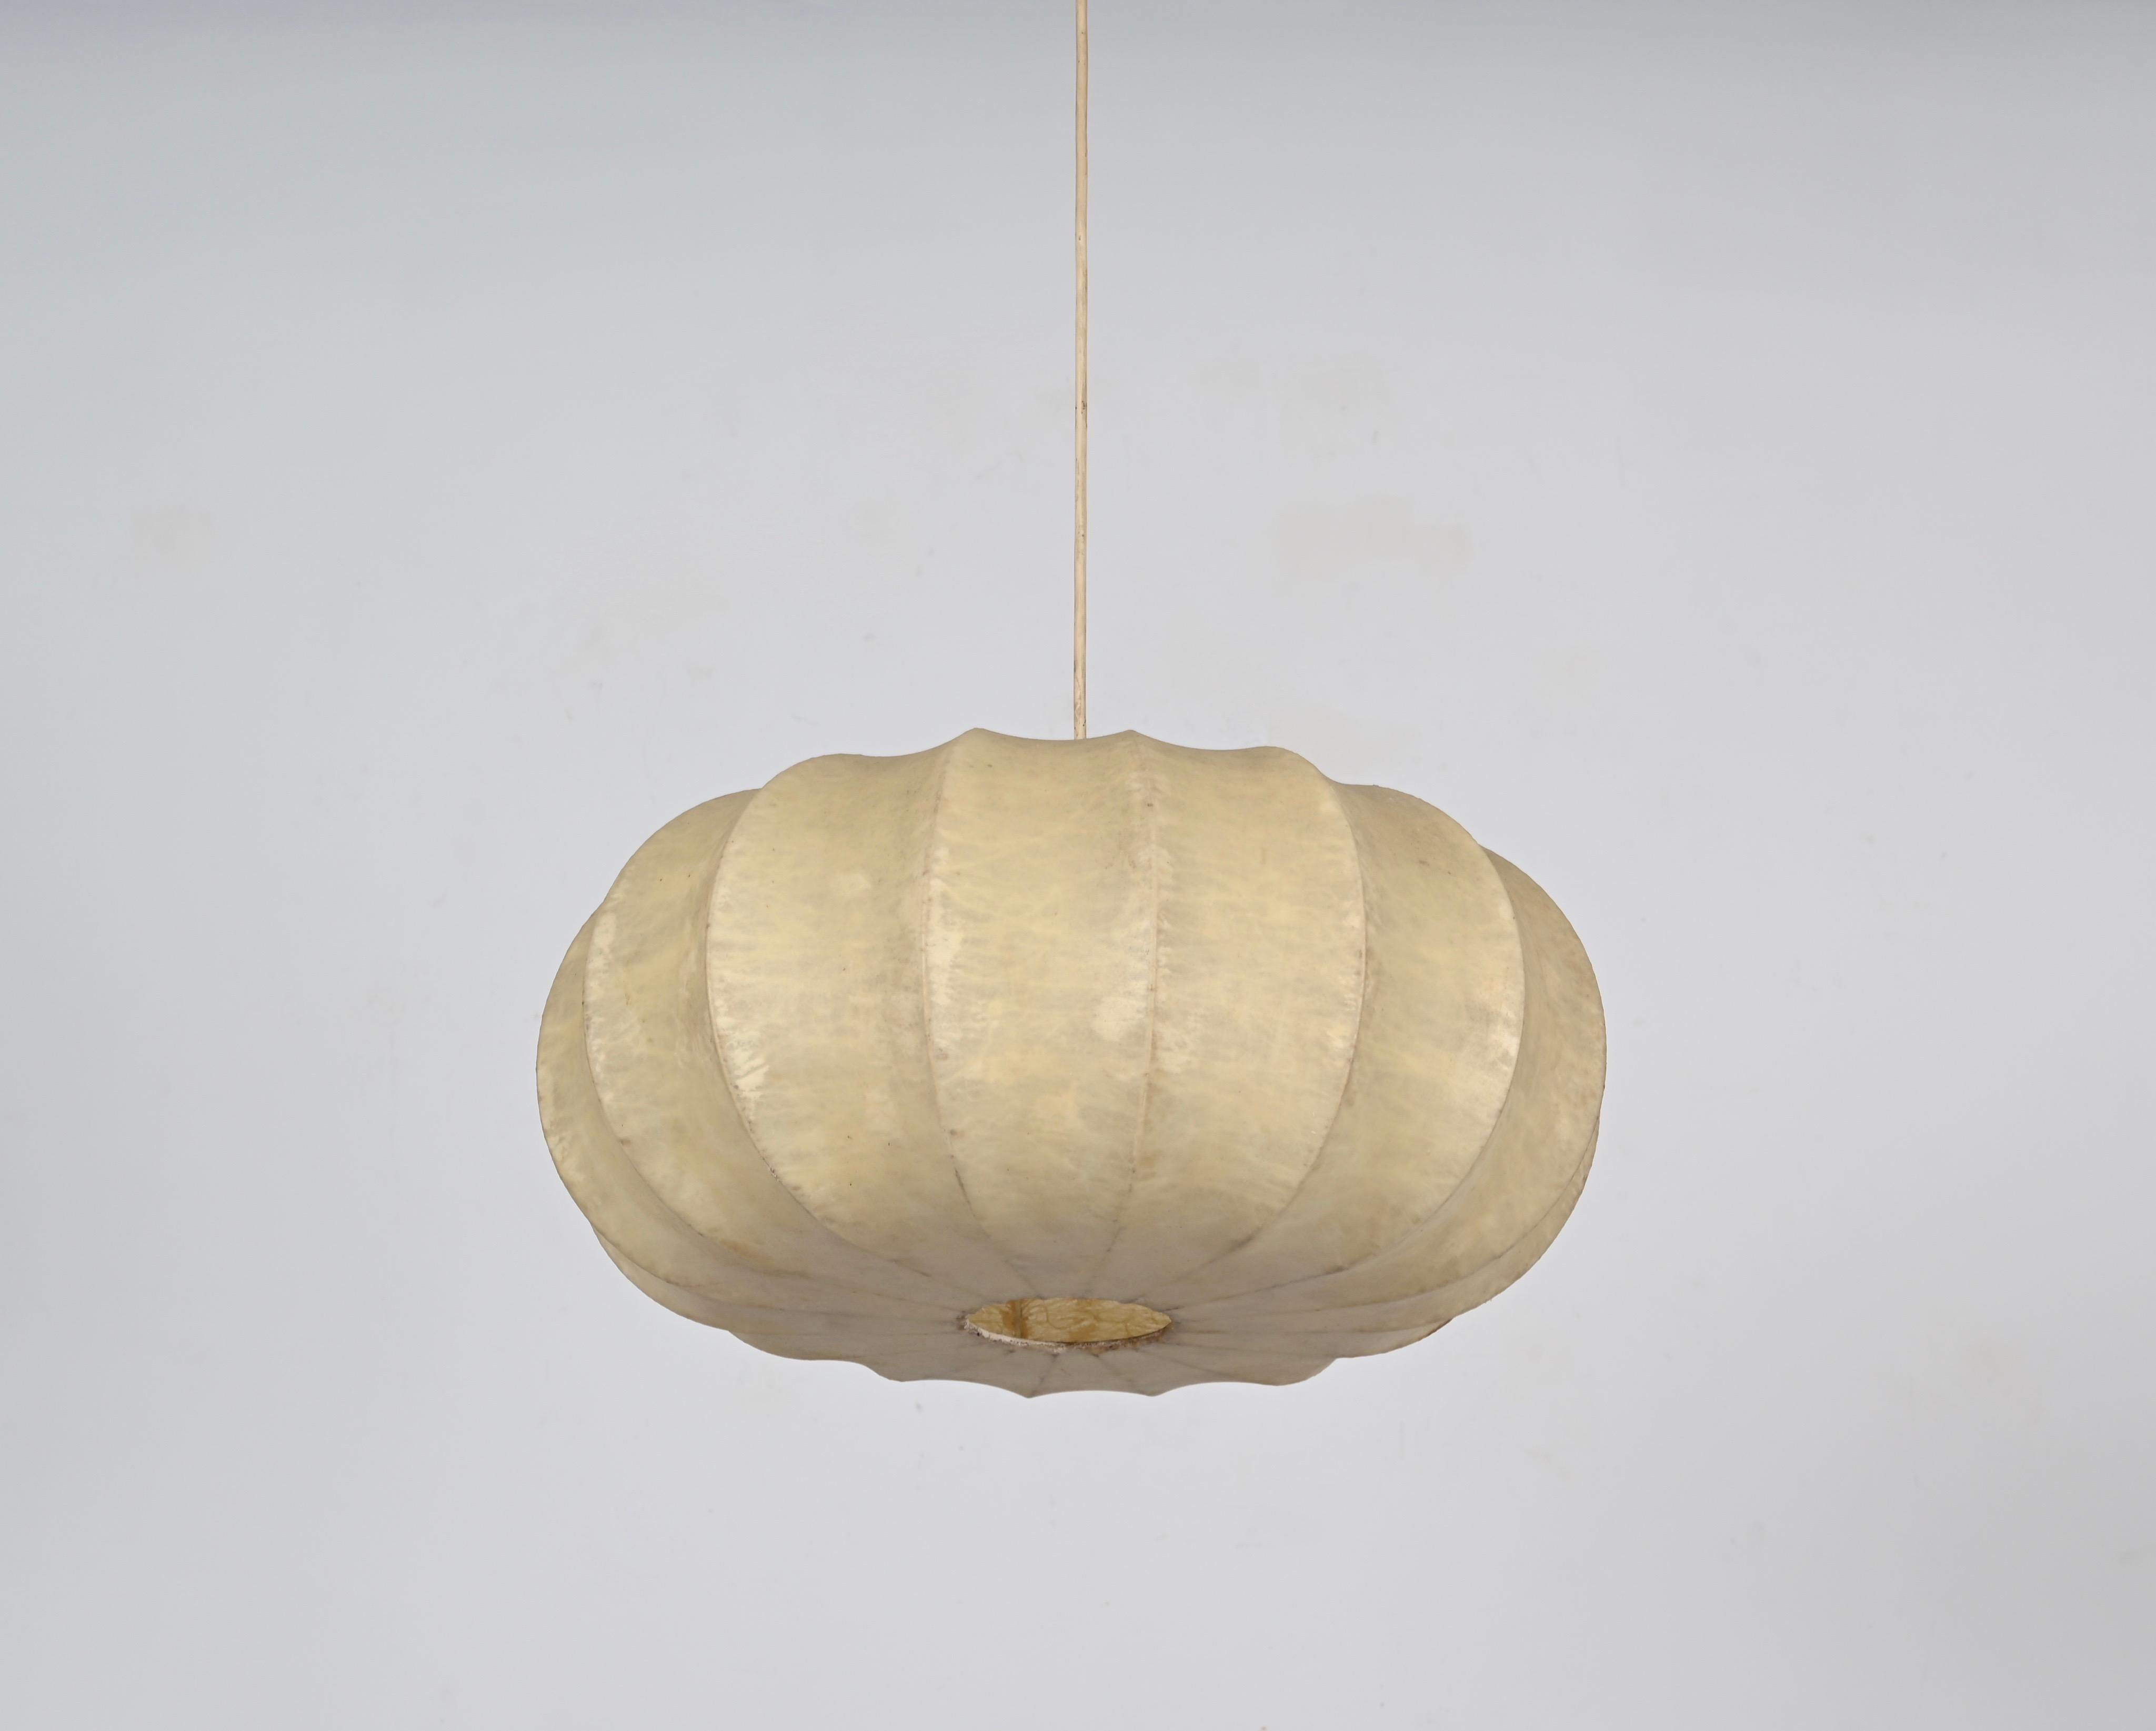 Hand-Crafted Midcentury Beige Cocoon Pendant Light by Castiglioni, Italy 1960s